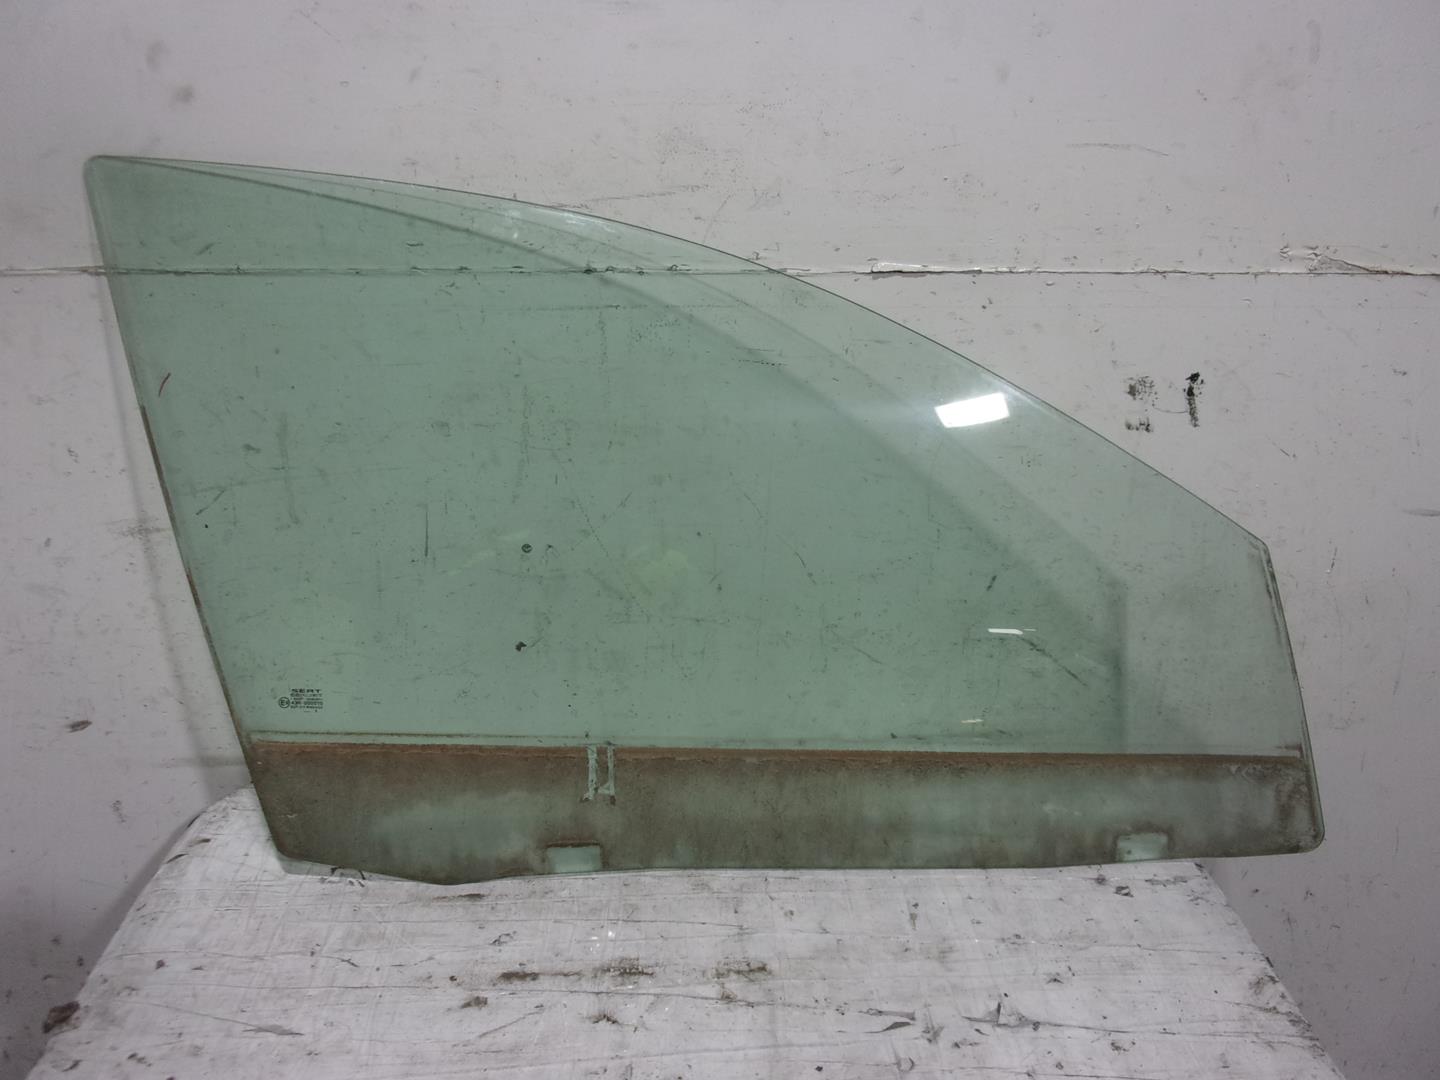 SEAT Ibiza 3 generation (2002-2008) Front Right Door Window 43R000015, DOT211M89AS2 24211470